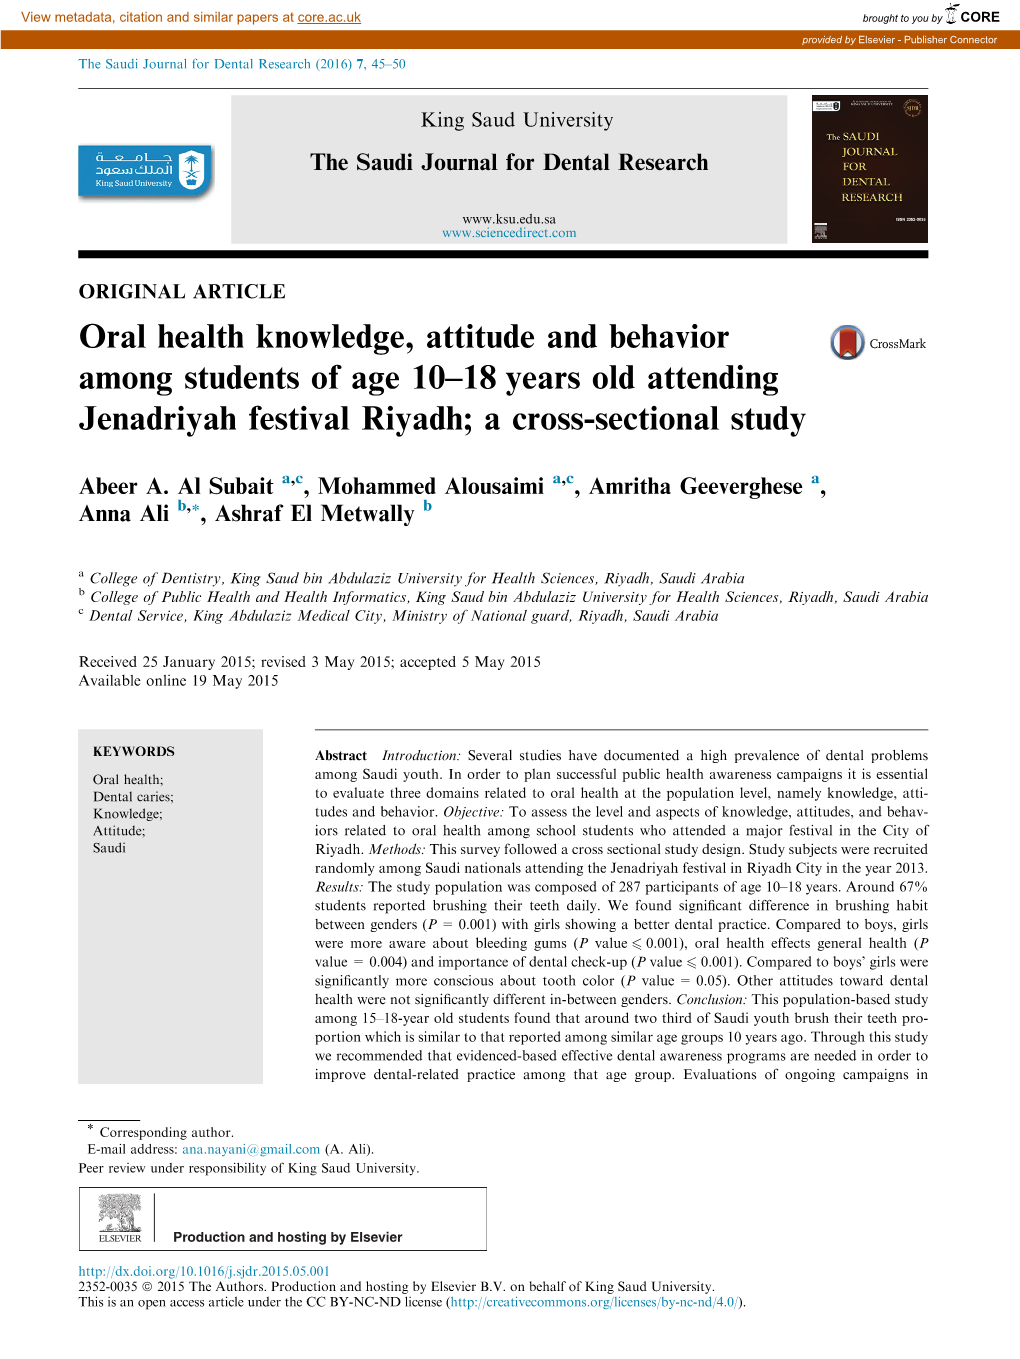 Oral Health Knowledge, Attitude and Behavior Among Students of Age 10–18 Years Old Attending Jenadriyah Festival Riyadh; a Cross-Sectional Study